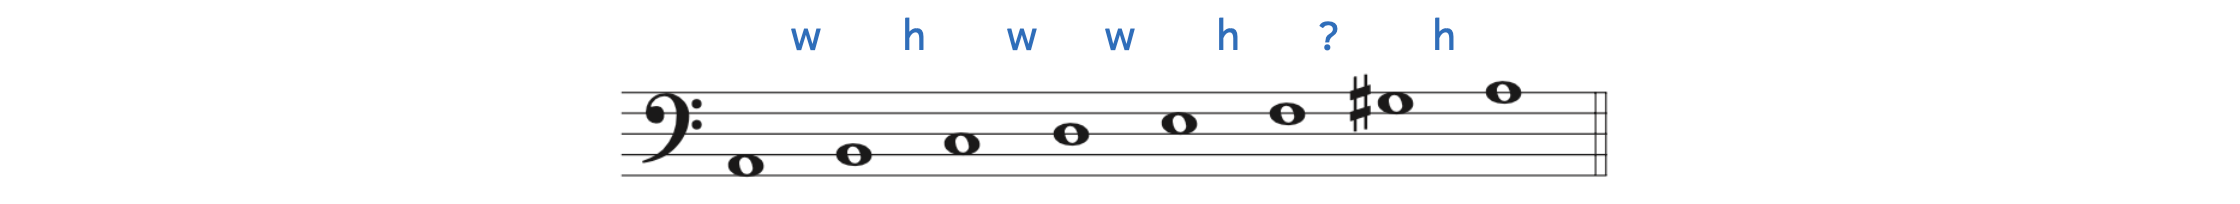 The ascending harmonic minor scale beginning on A2 shows an unfamiliar step between the submediant and the leading tone: it is neither a half step nor a whole step. It is a large gap.